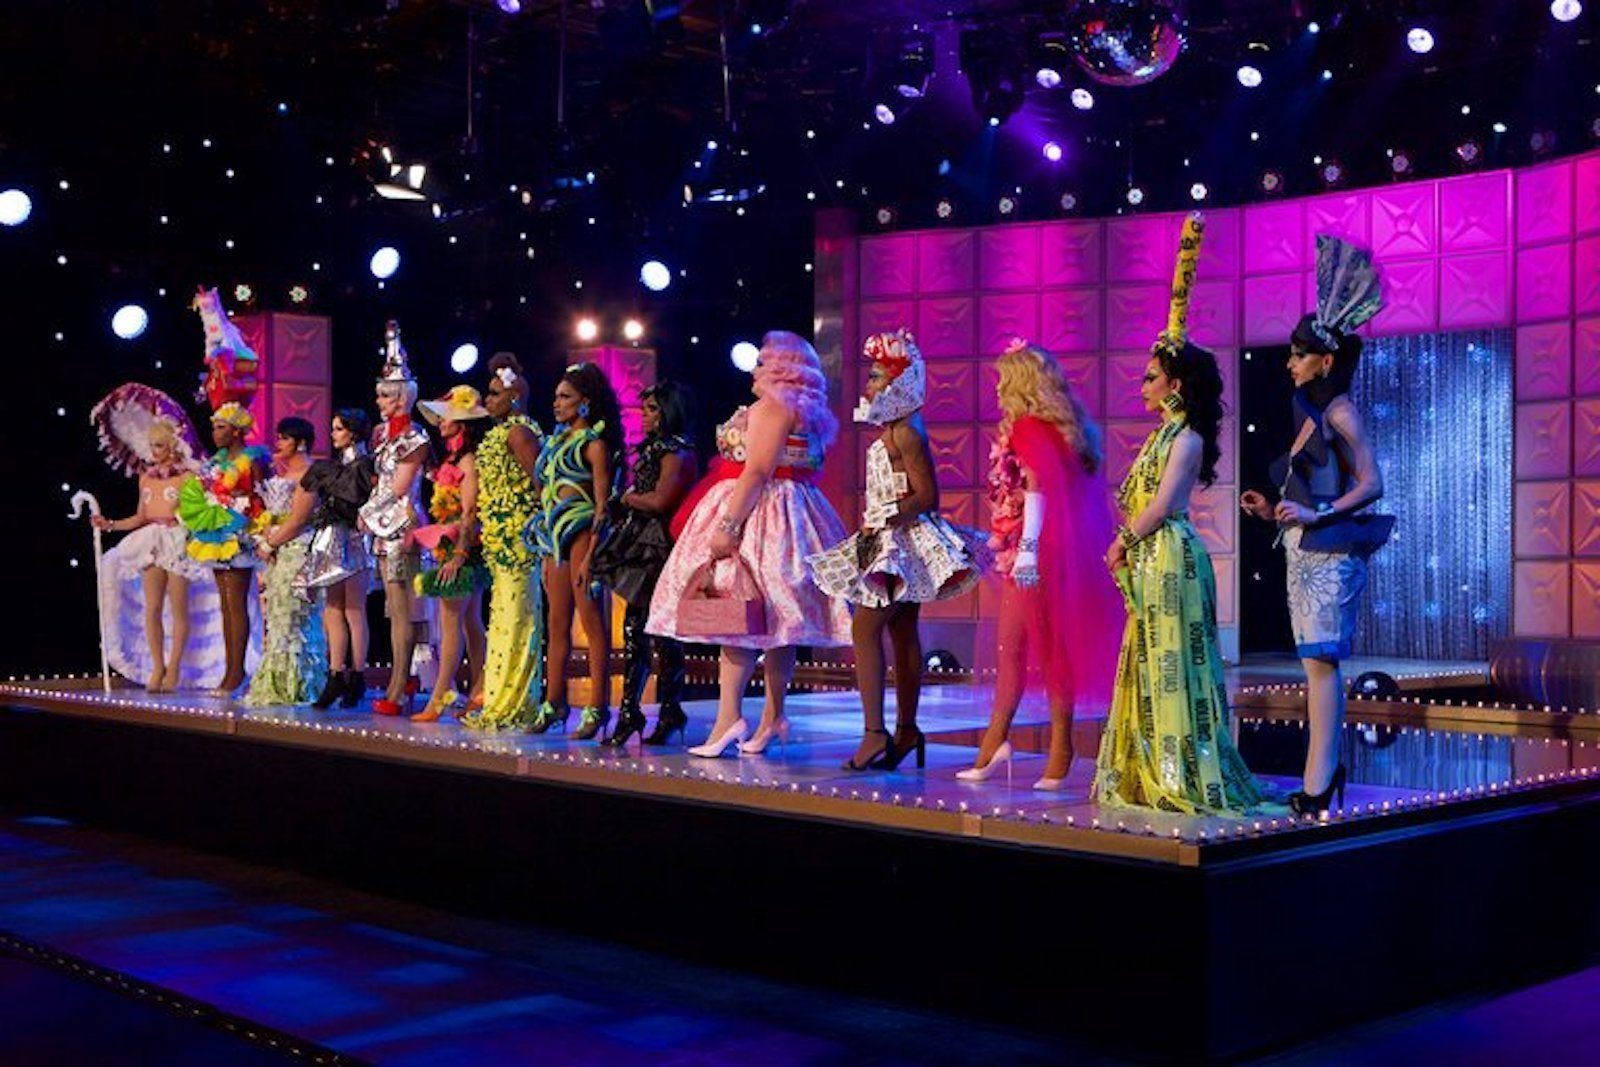 Drag Race season 10 episode 1 recap: 'Is it usually this intense?' A newbie's hot take1600 x 1067